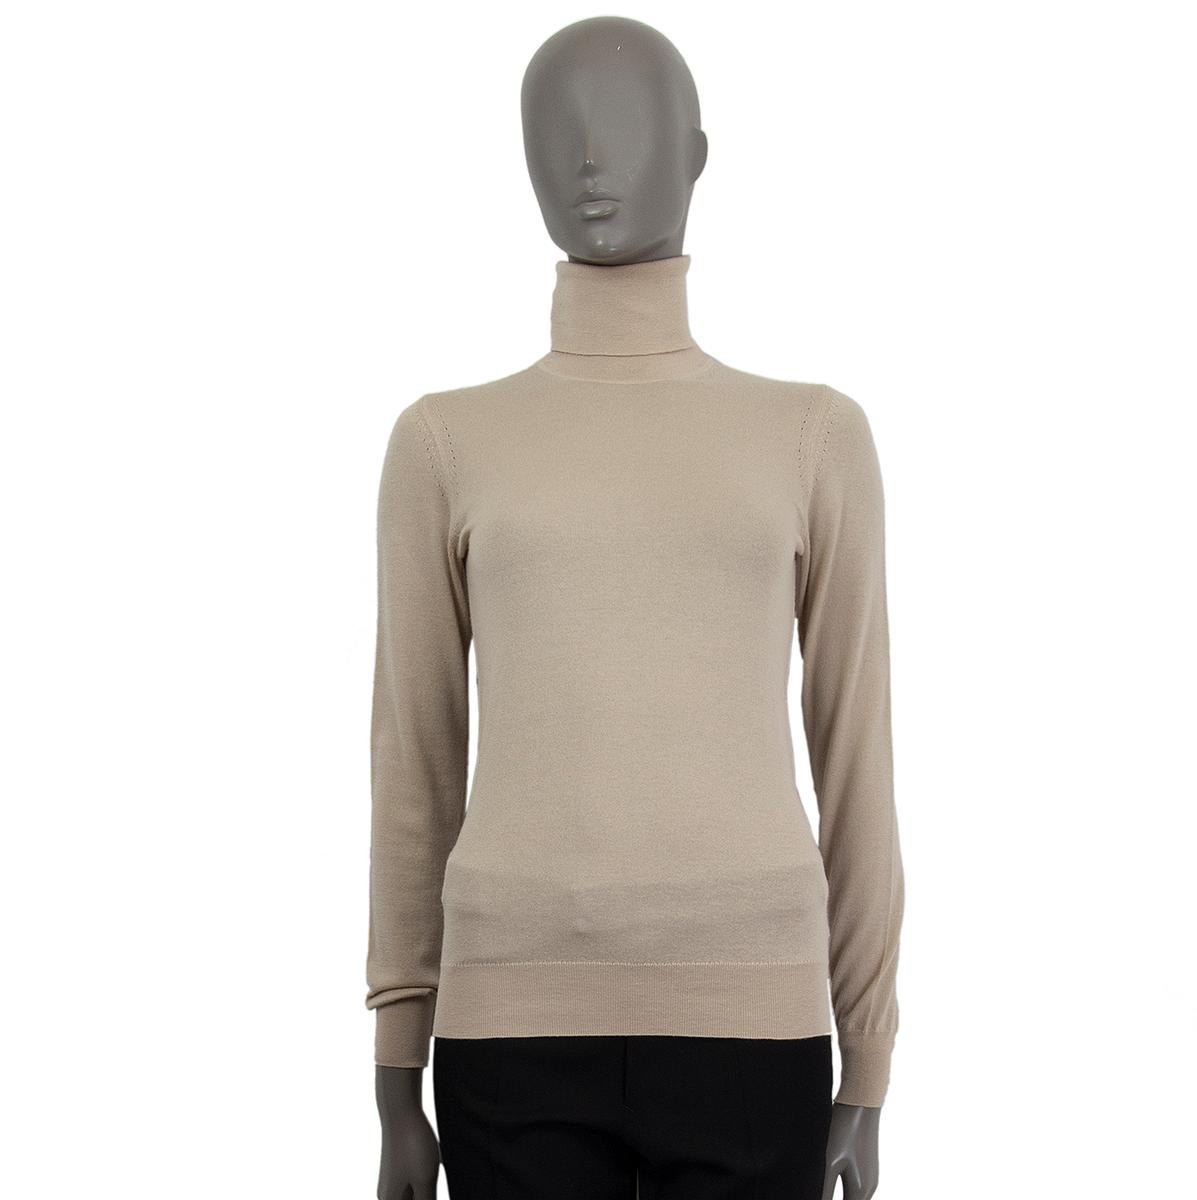 Loro Piana turtleneck sweater in light beige cashmere (100%). Has been worn and is in excellent condition.

Tag Size 38
Size XS
Shoulder Width 34cm (13.3in)
Bust 78cm (30.4in) to 90cm (35.1in)
Waist 74cm (28.9in) to 86cm (33.5in)
Hips 54cm (21.1in)